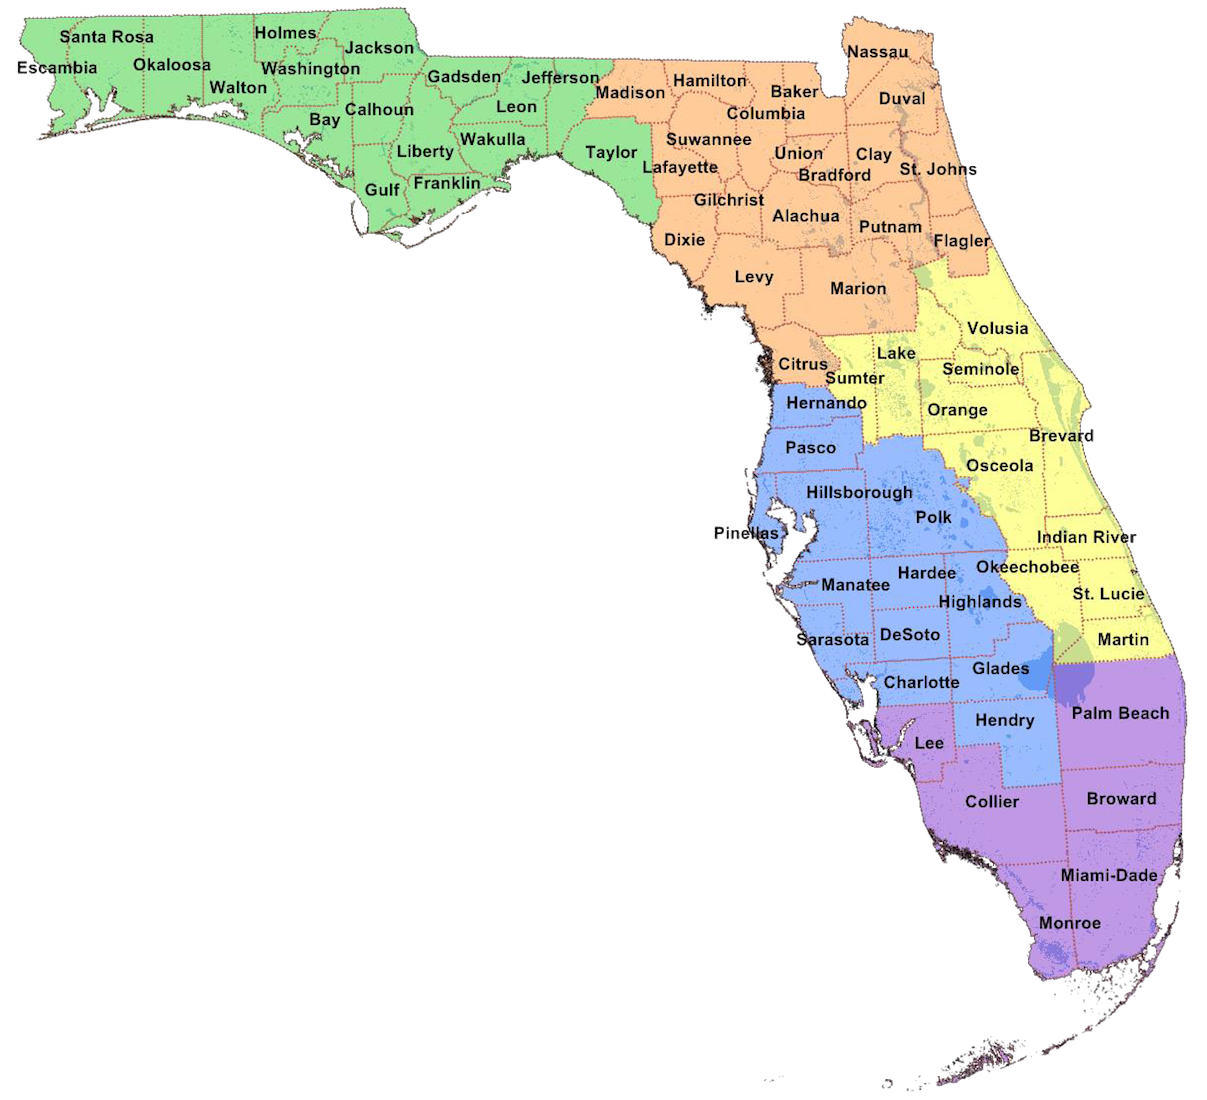 Florida School Districts color-coded by region